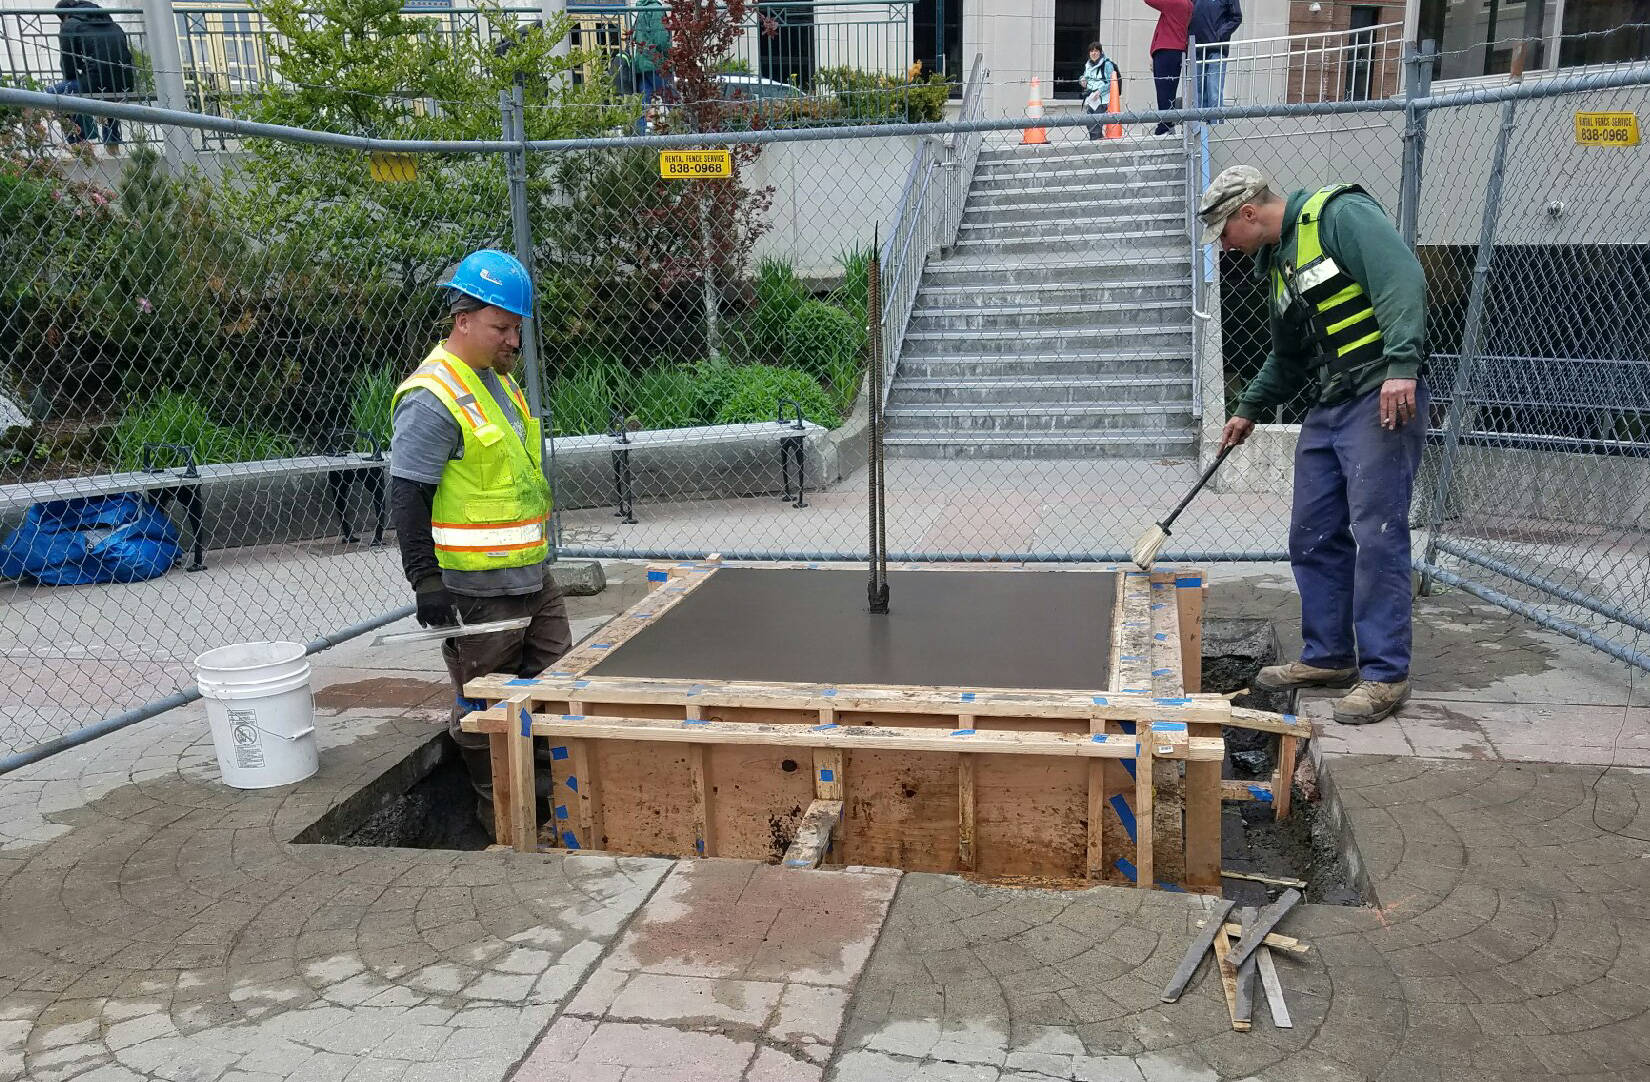 Kris Brown, foreman (left) and Wayne Coogan (right), employees of Coogan Construction, finish pouring the concrete pedestal for William H Seward statue. (Photo courtesy of Wayne Coogan)